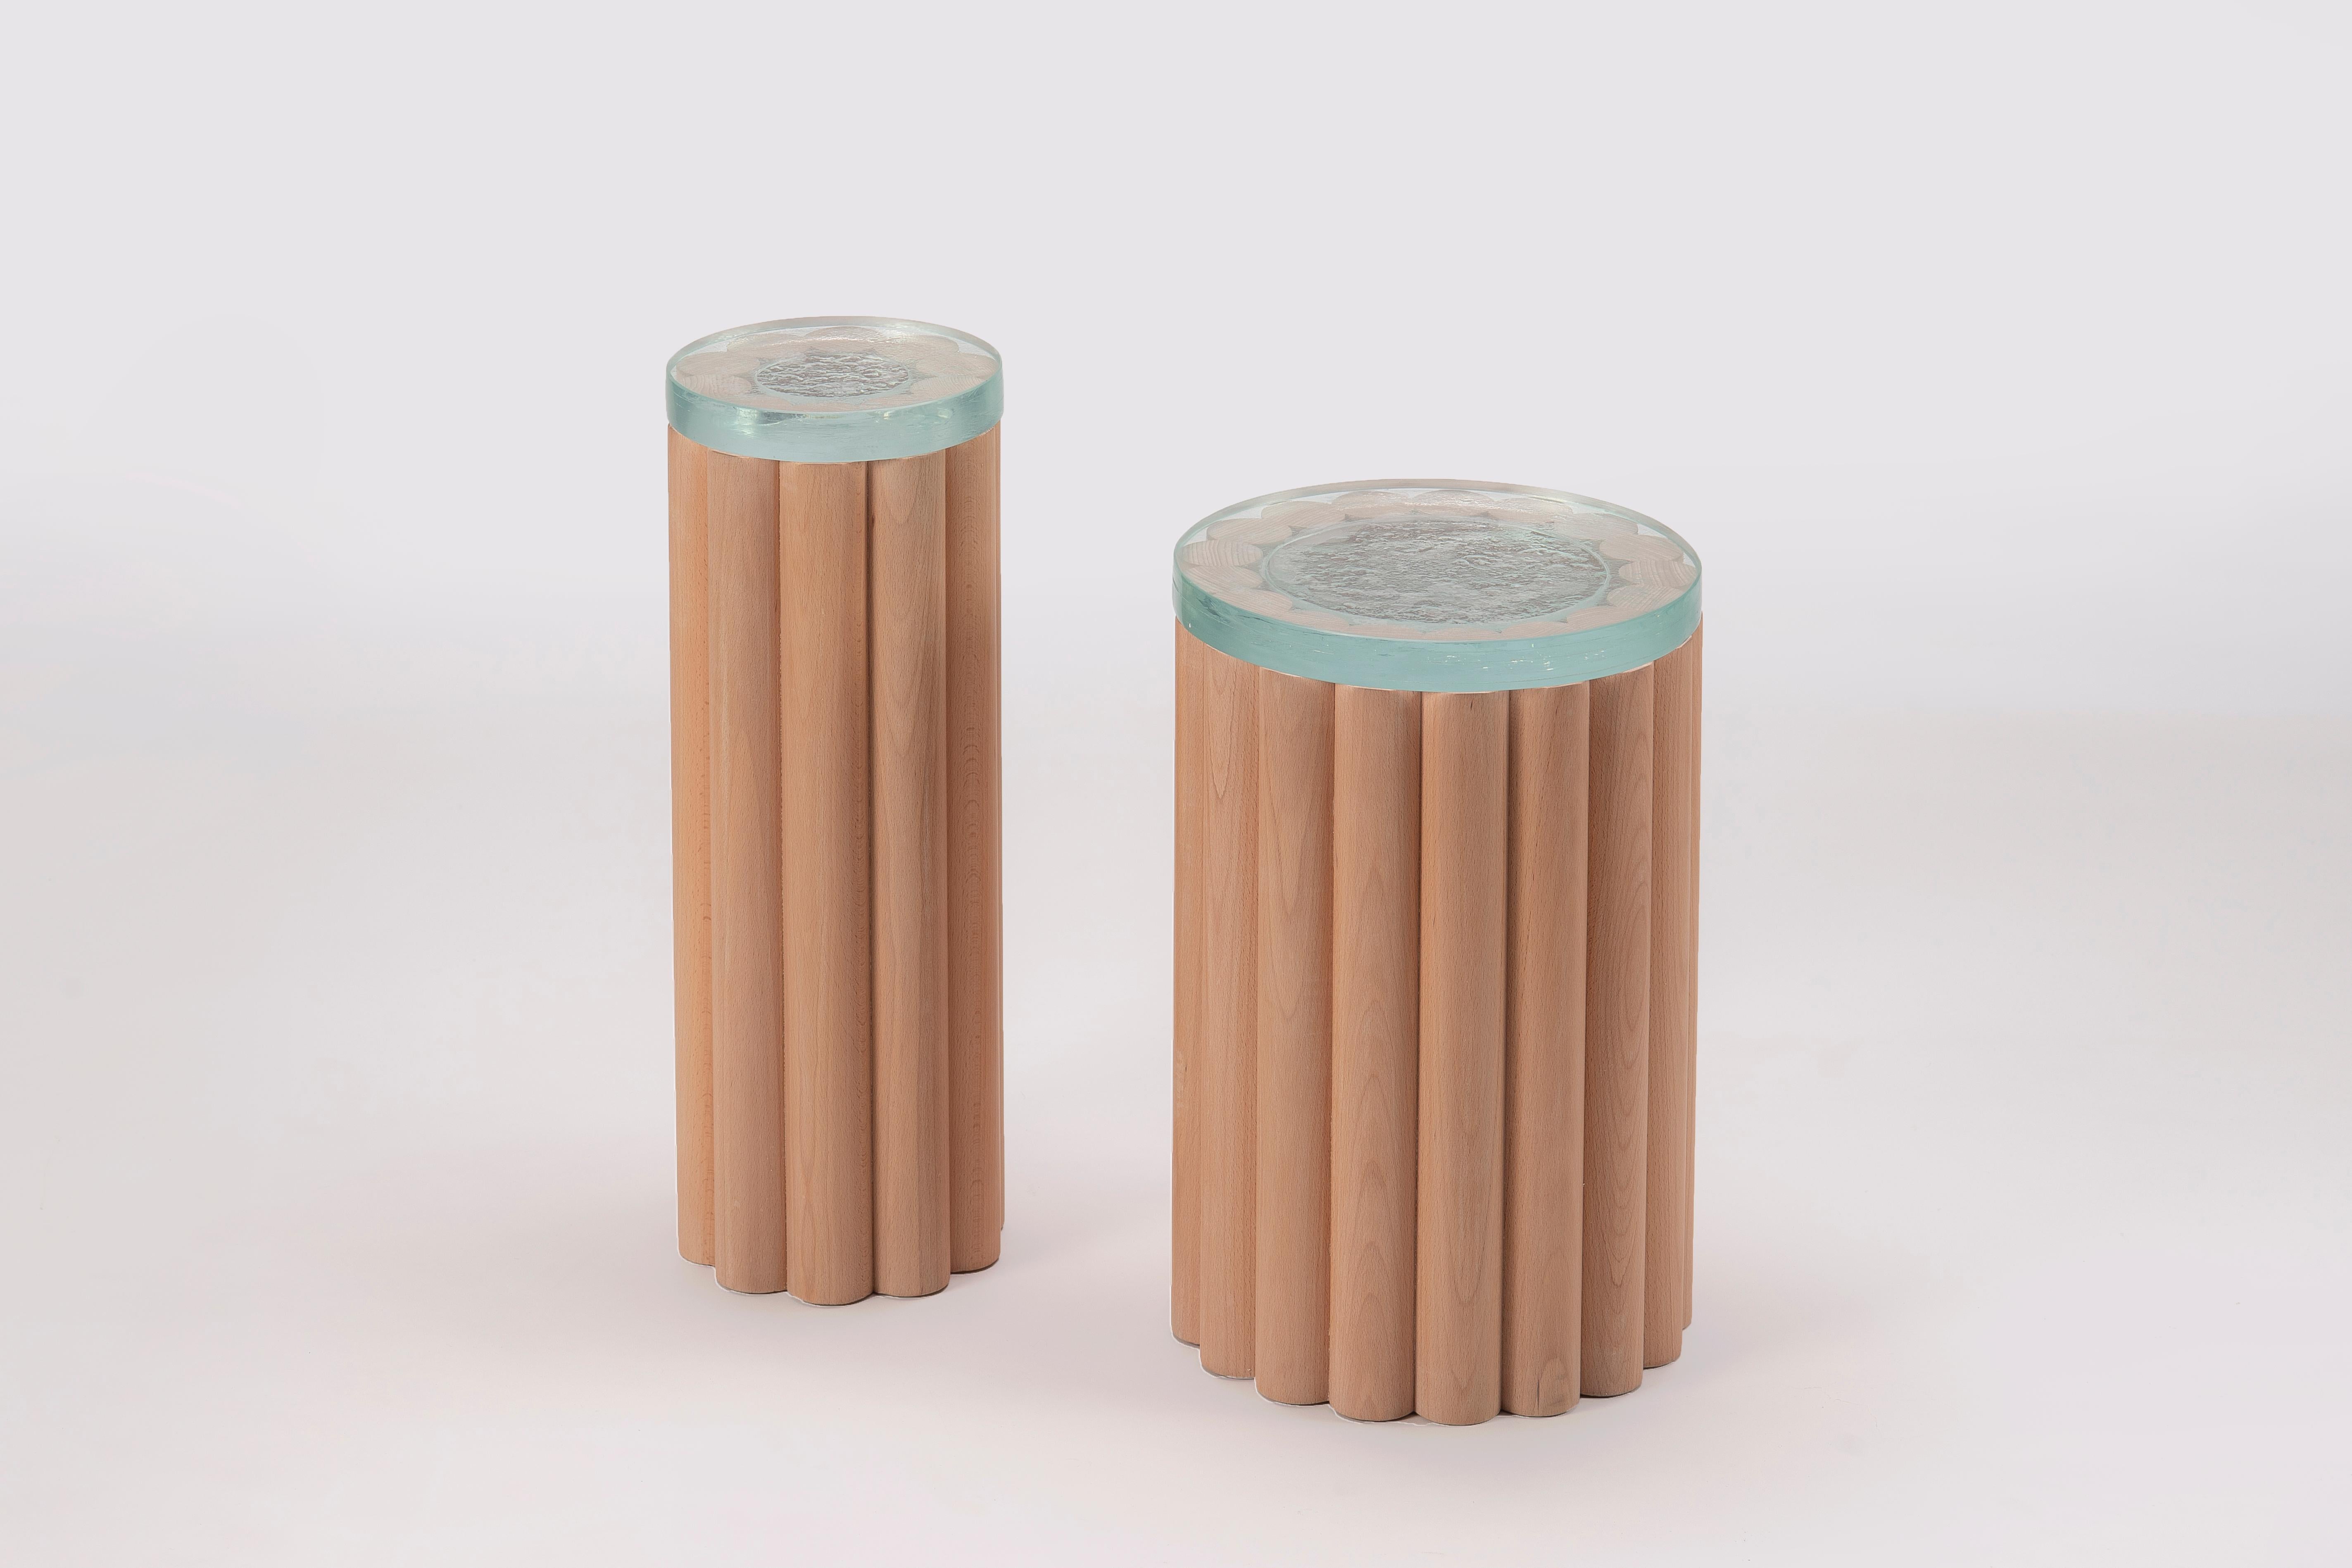 Inspired in the exercise of experimenting with a number of turned rods of wood. Loto side-tables are a simple yet stylish statement, featuring two cylindrical bodies in different diameters and heights and Tlaquepaque molten glass fused tops